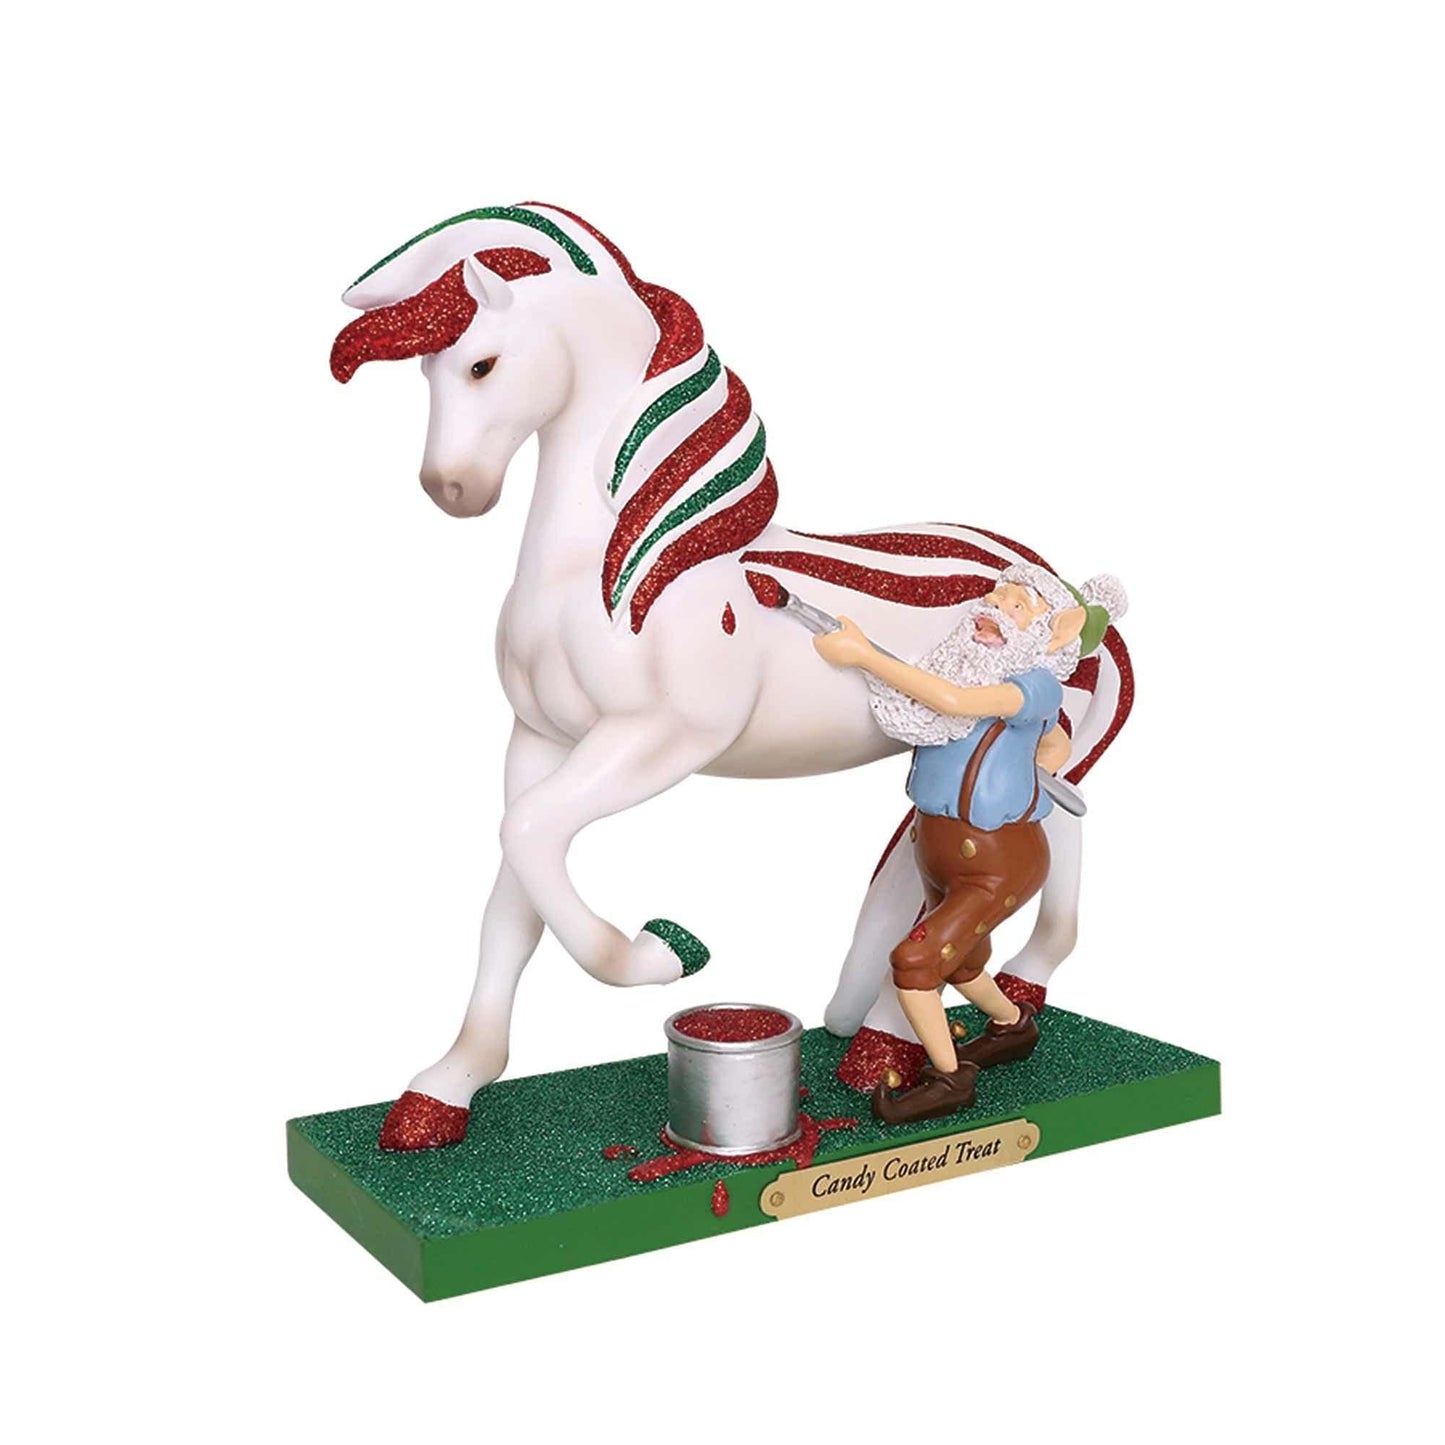 Candy Coated Treat Figurine - Shelburne Country Store